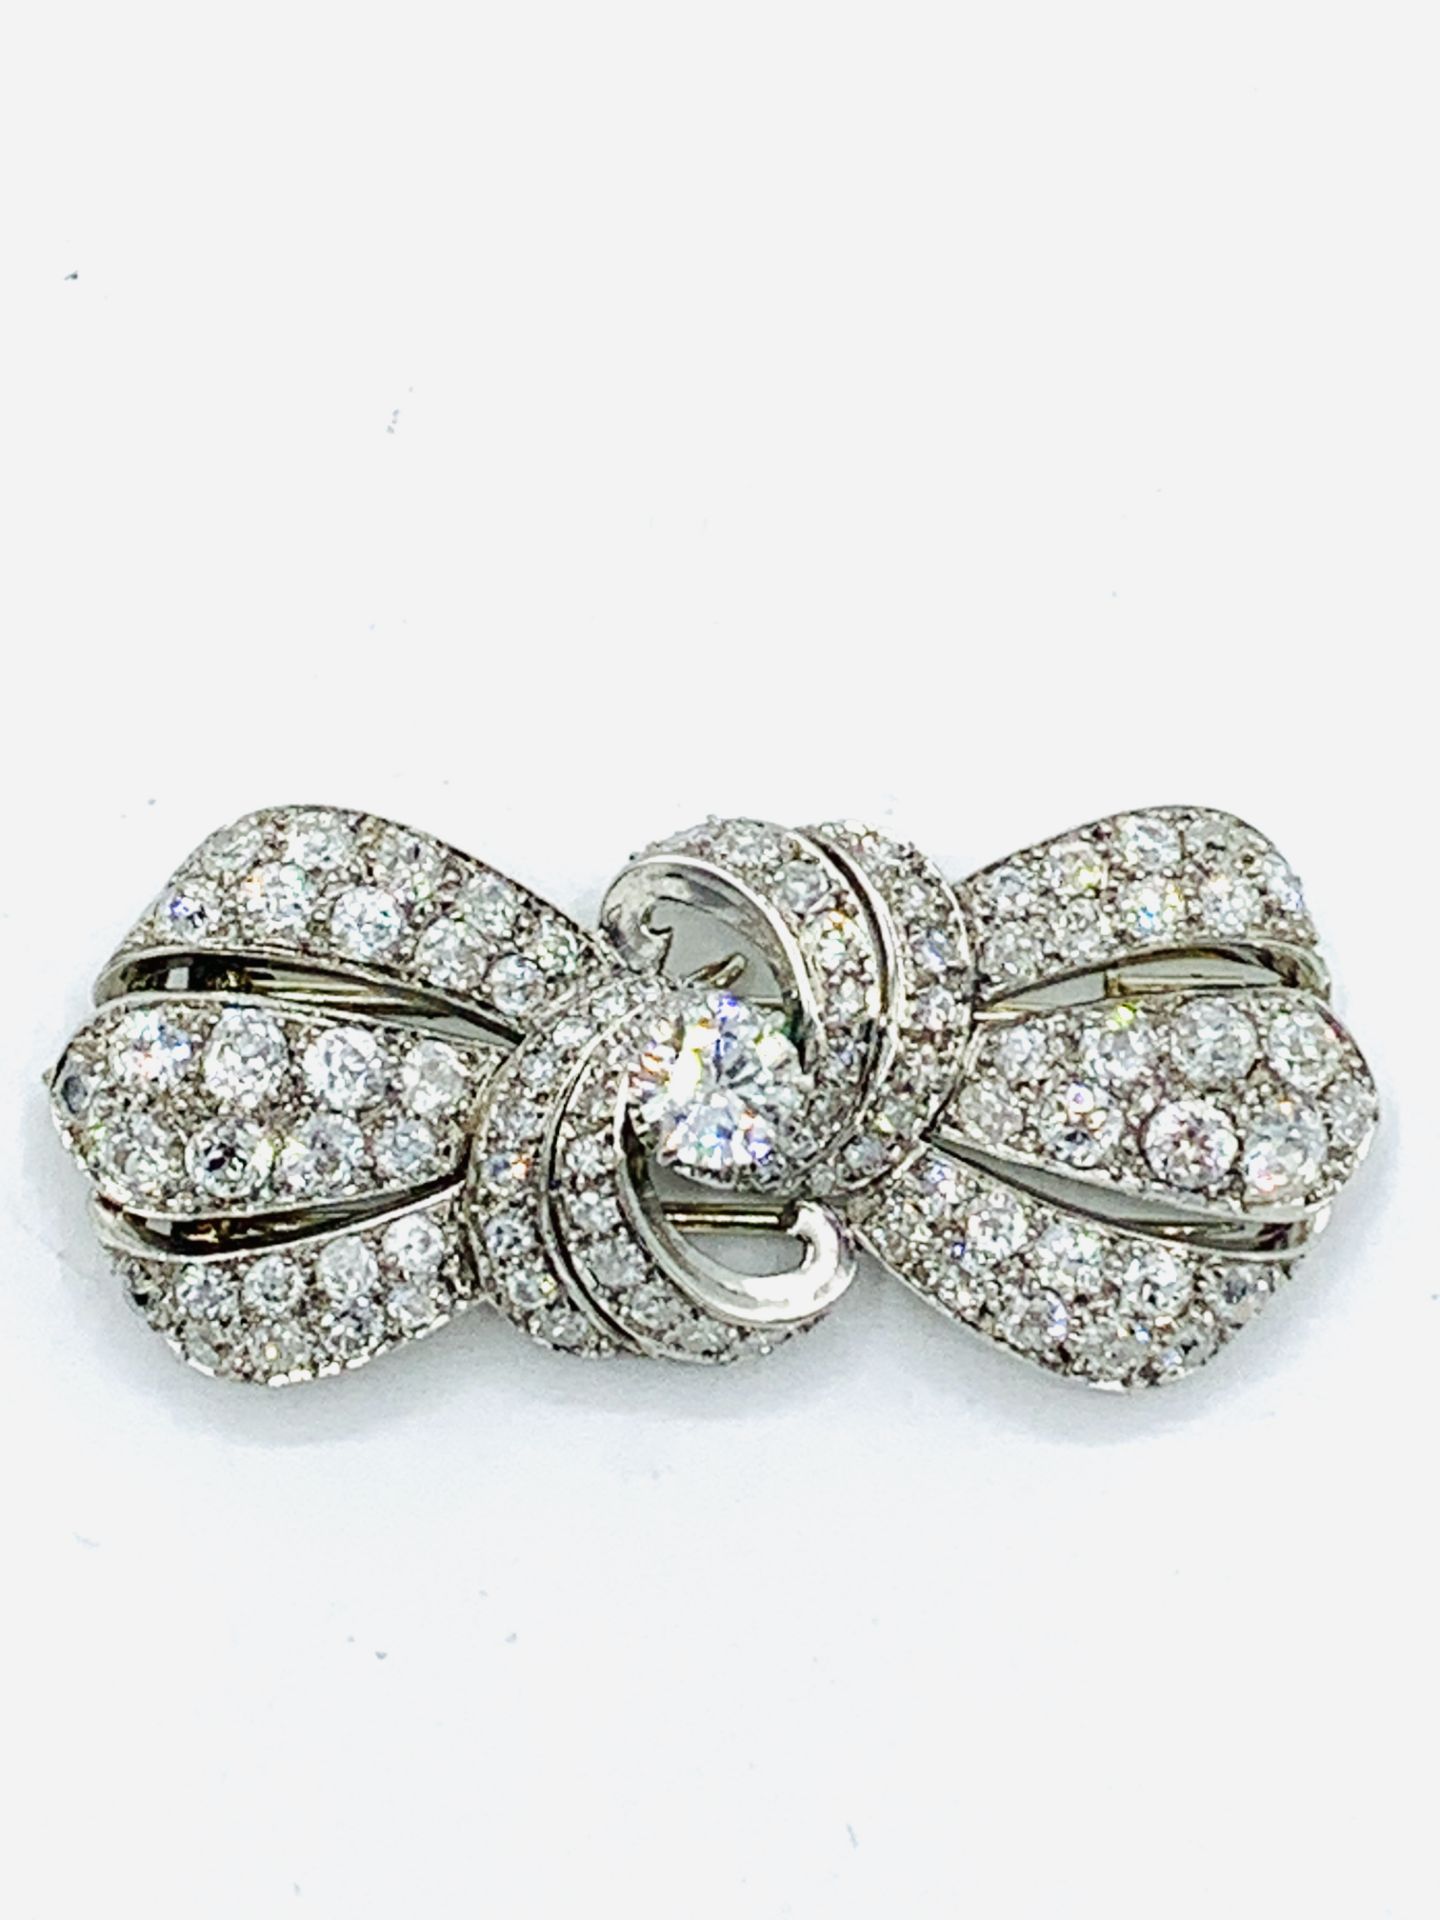 18ct gold and diamond clip brooch, centre stone approximately 1.3ct - Image 4 of 8